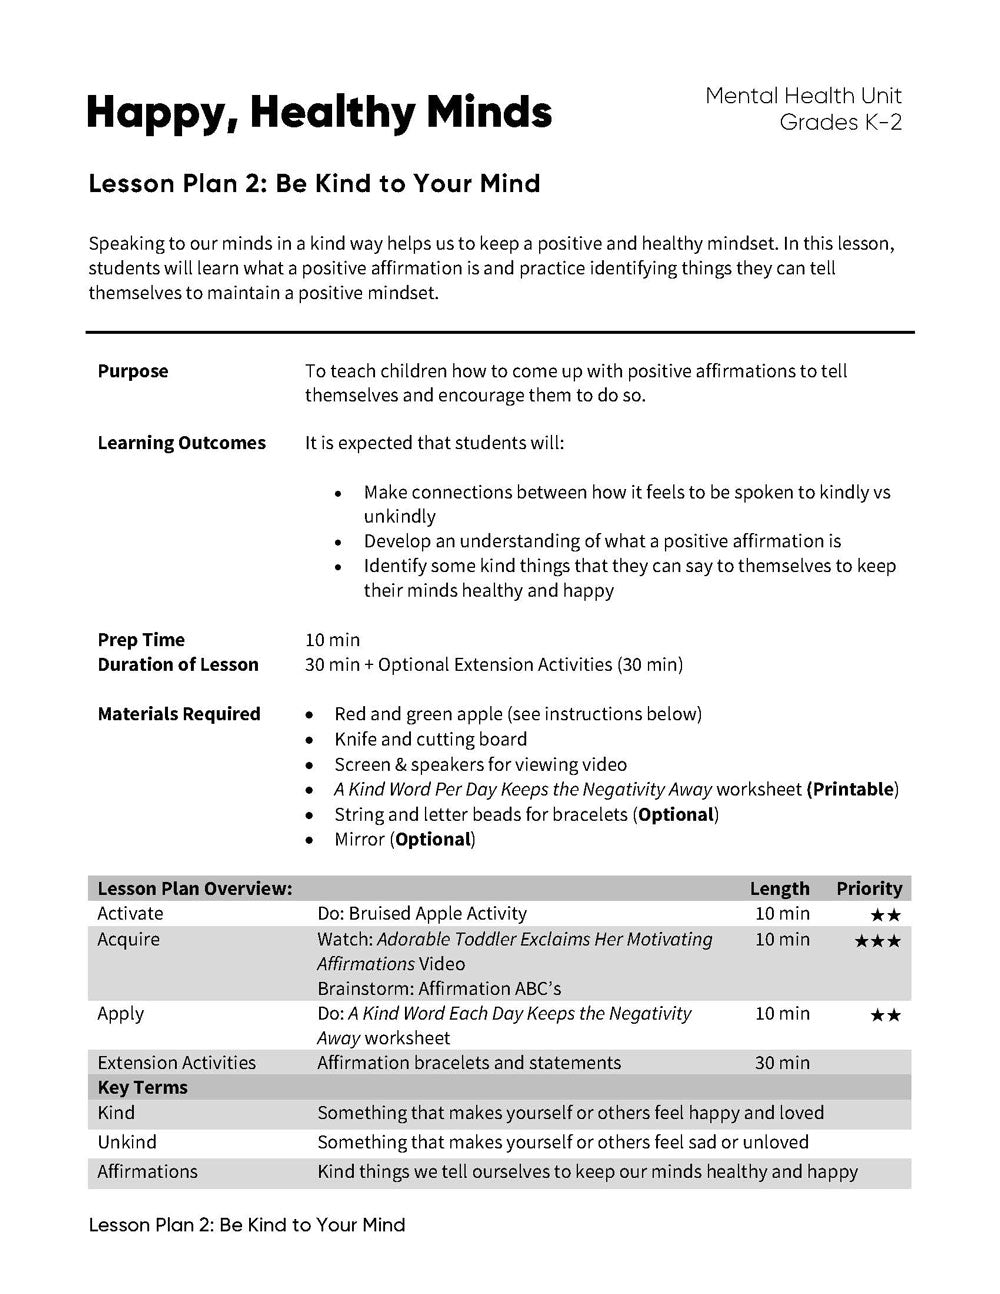 Lesson Plan 2: Be Kind to Your Mind